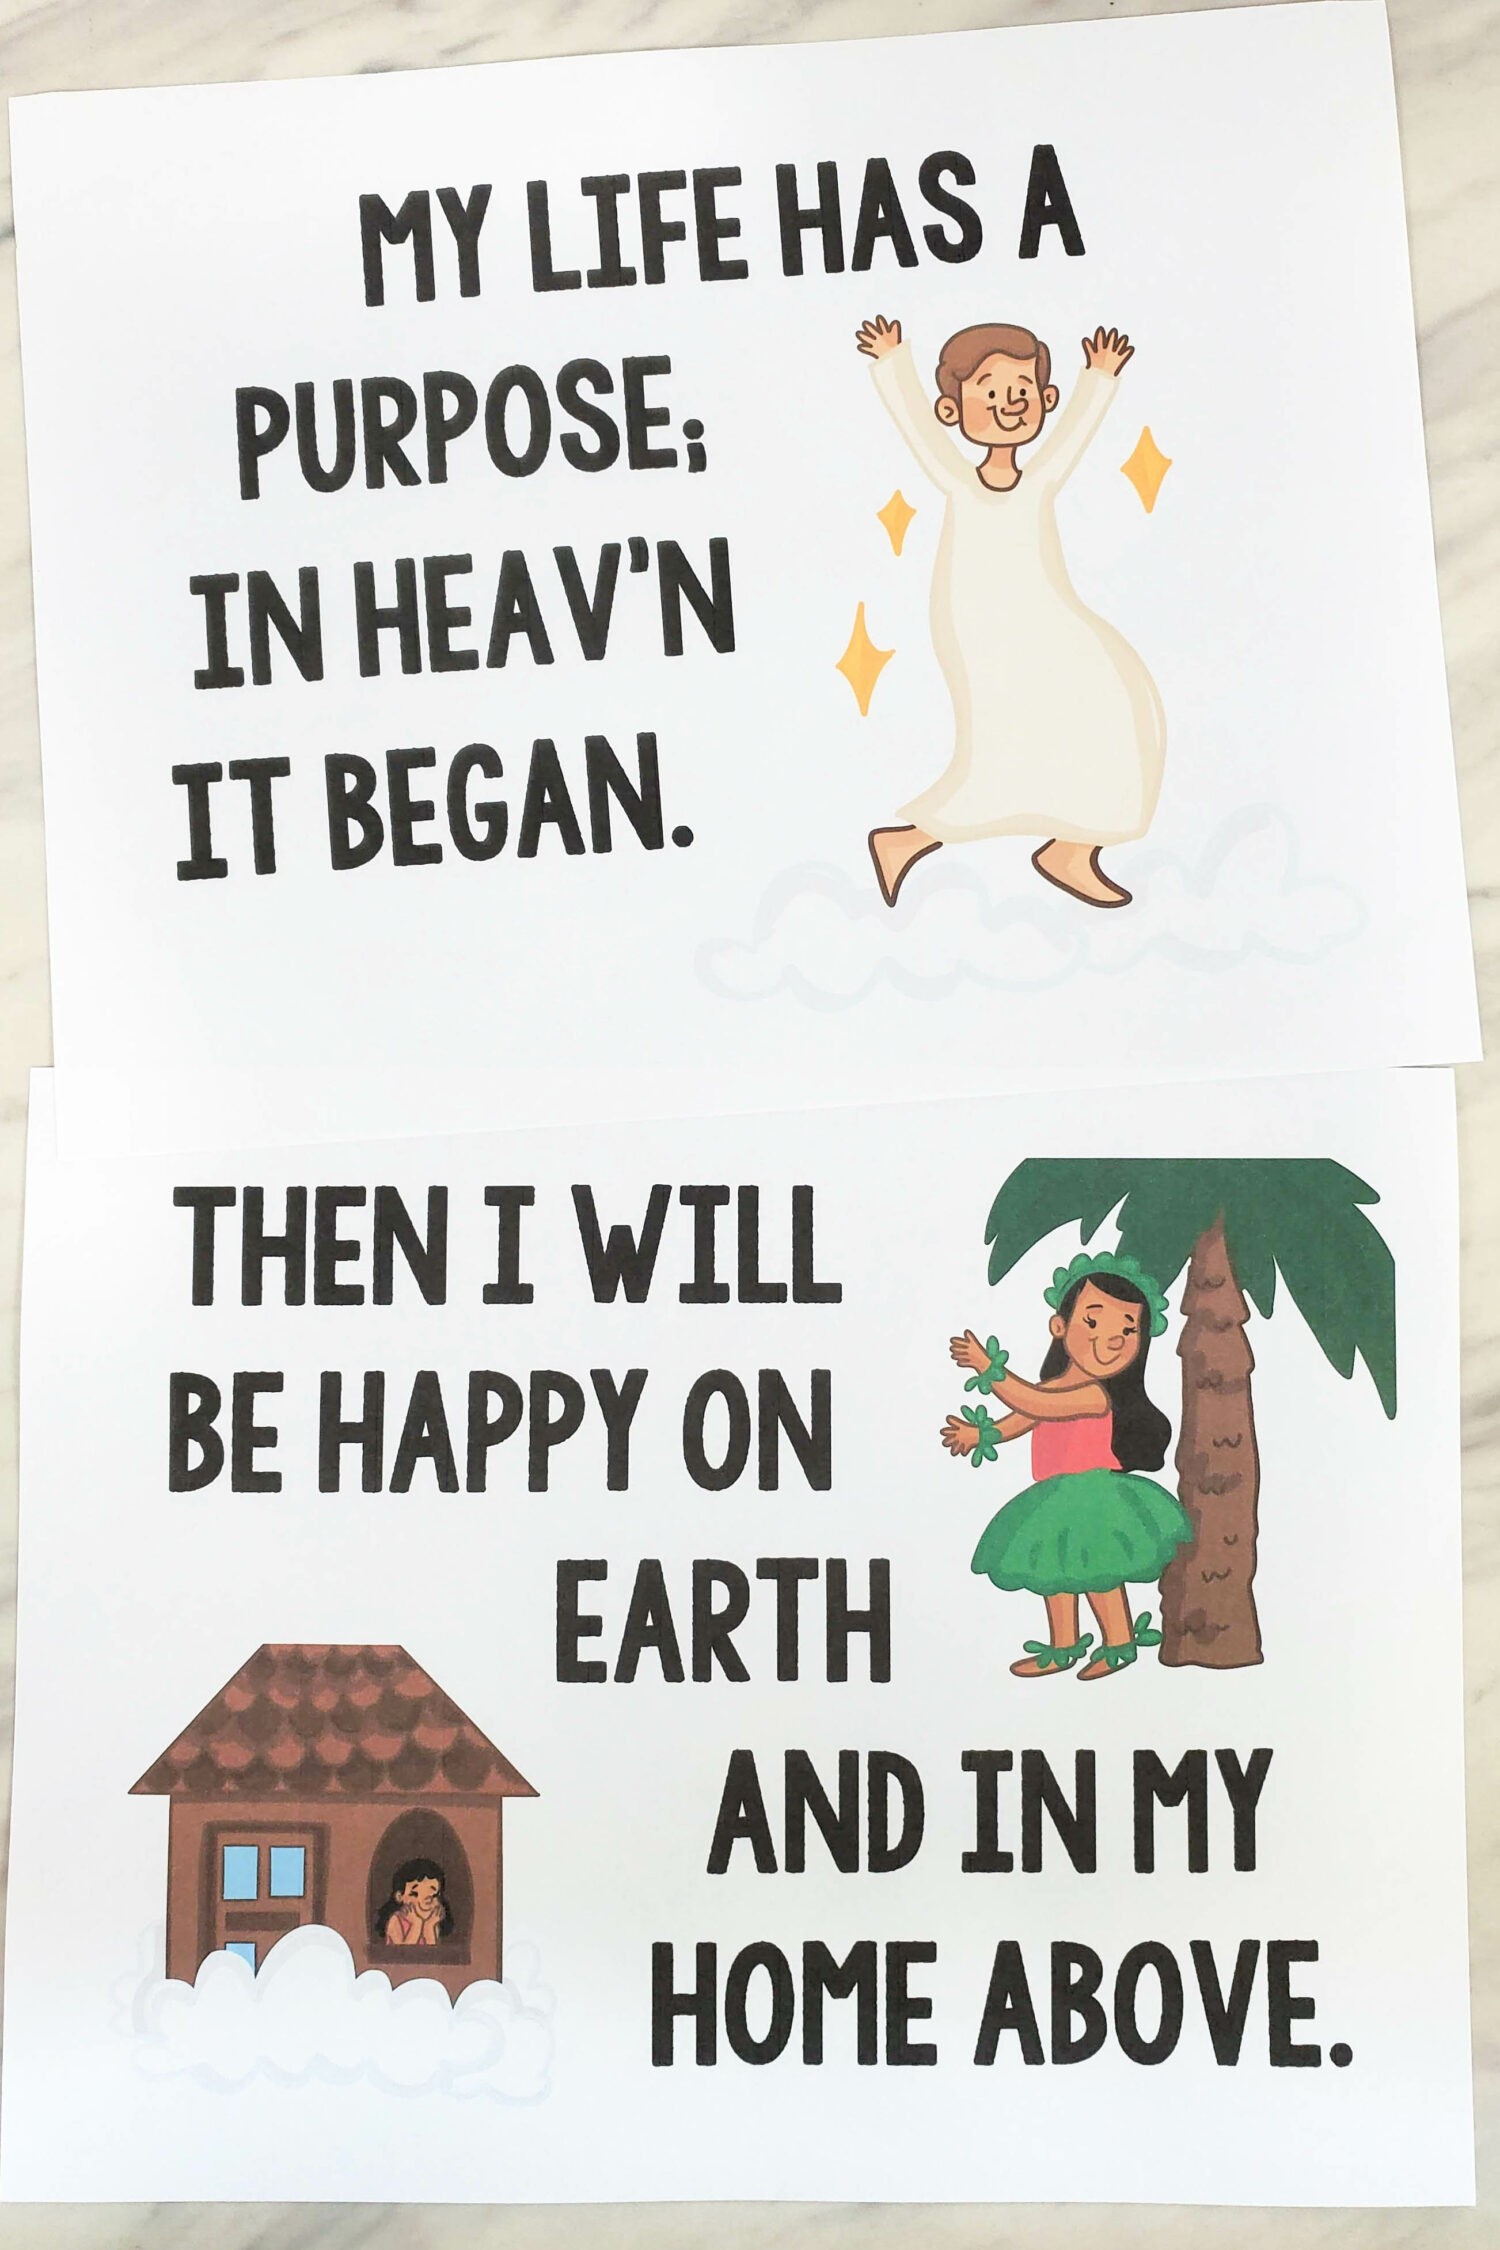 I Will Follow God's Plan Flip Chart printable lyrics and pictures to help you teach this song for LDS Primary music leaders singing time visual aids